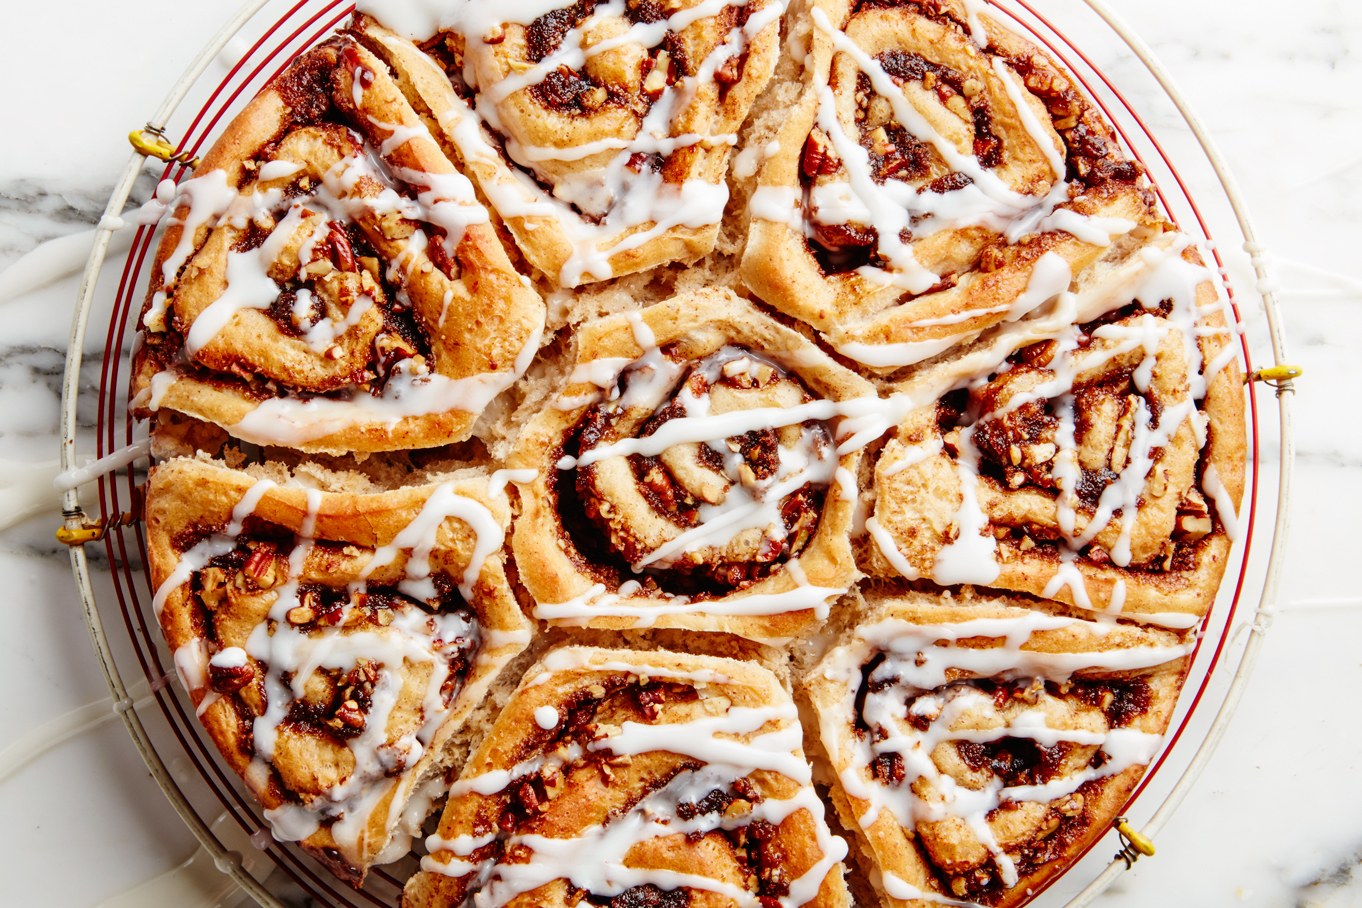 🥐 Can We Guess Your Age and Gender Based on the Pastries You’ve Eaten? Cinnamon Rolls